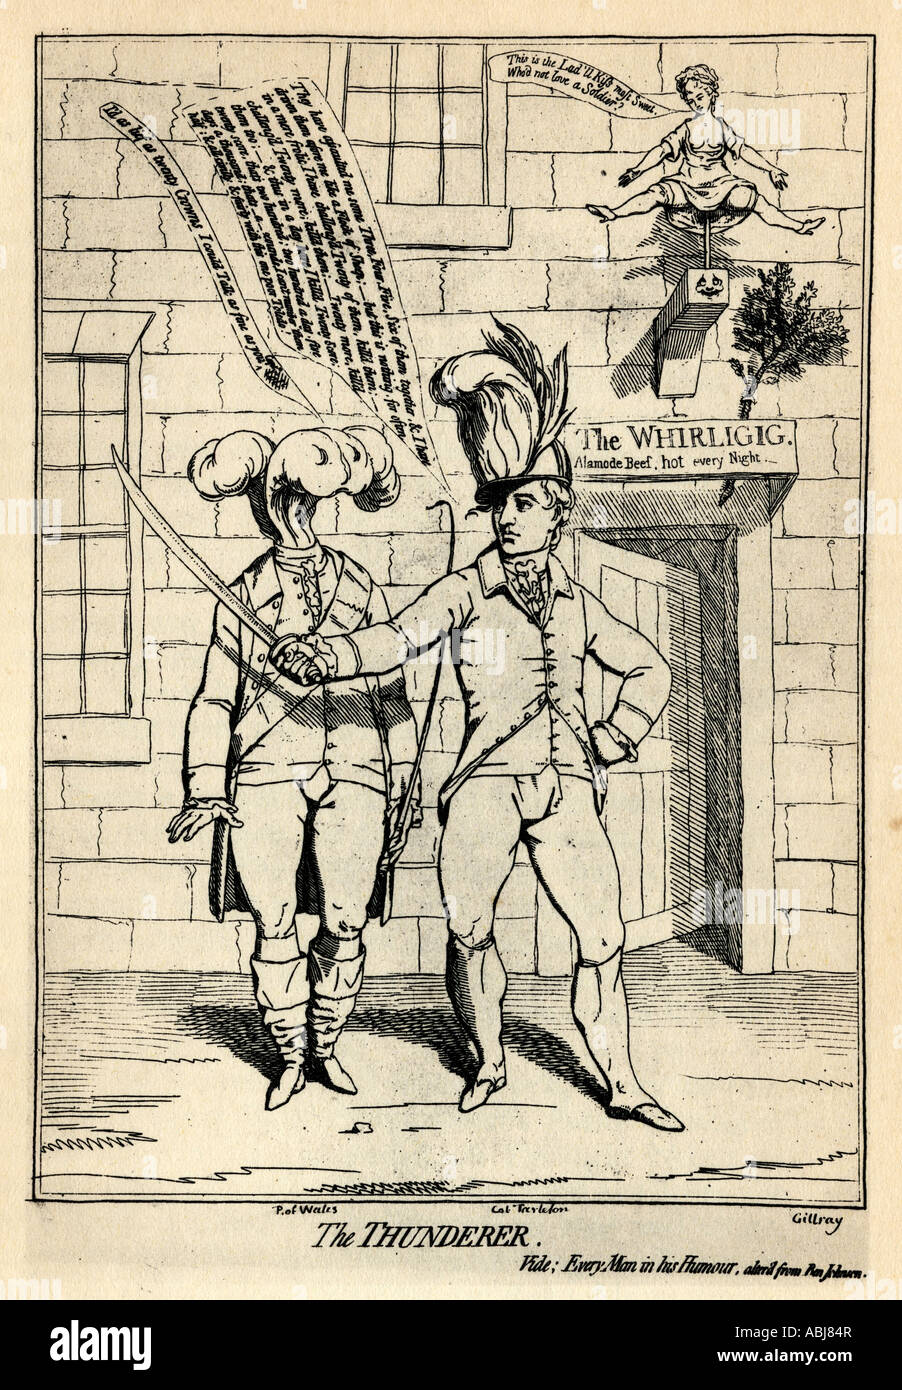 The Thunderer. Contemporary cartoon concerning the Prince of Wales, Colonel Tarleton and their mutual lover, Mary Perdita Robinson. Stock Photo